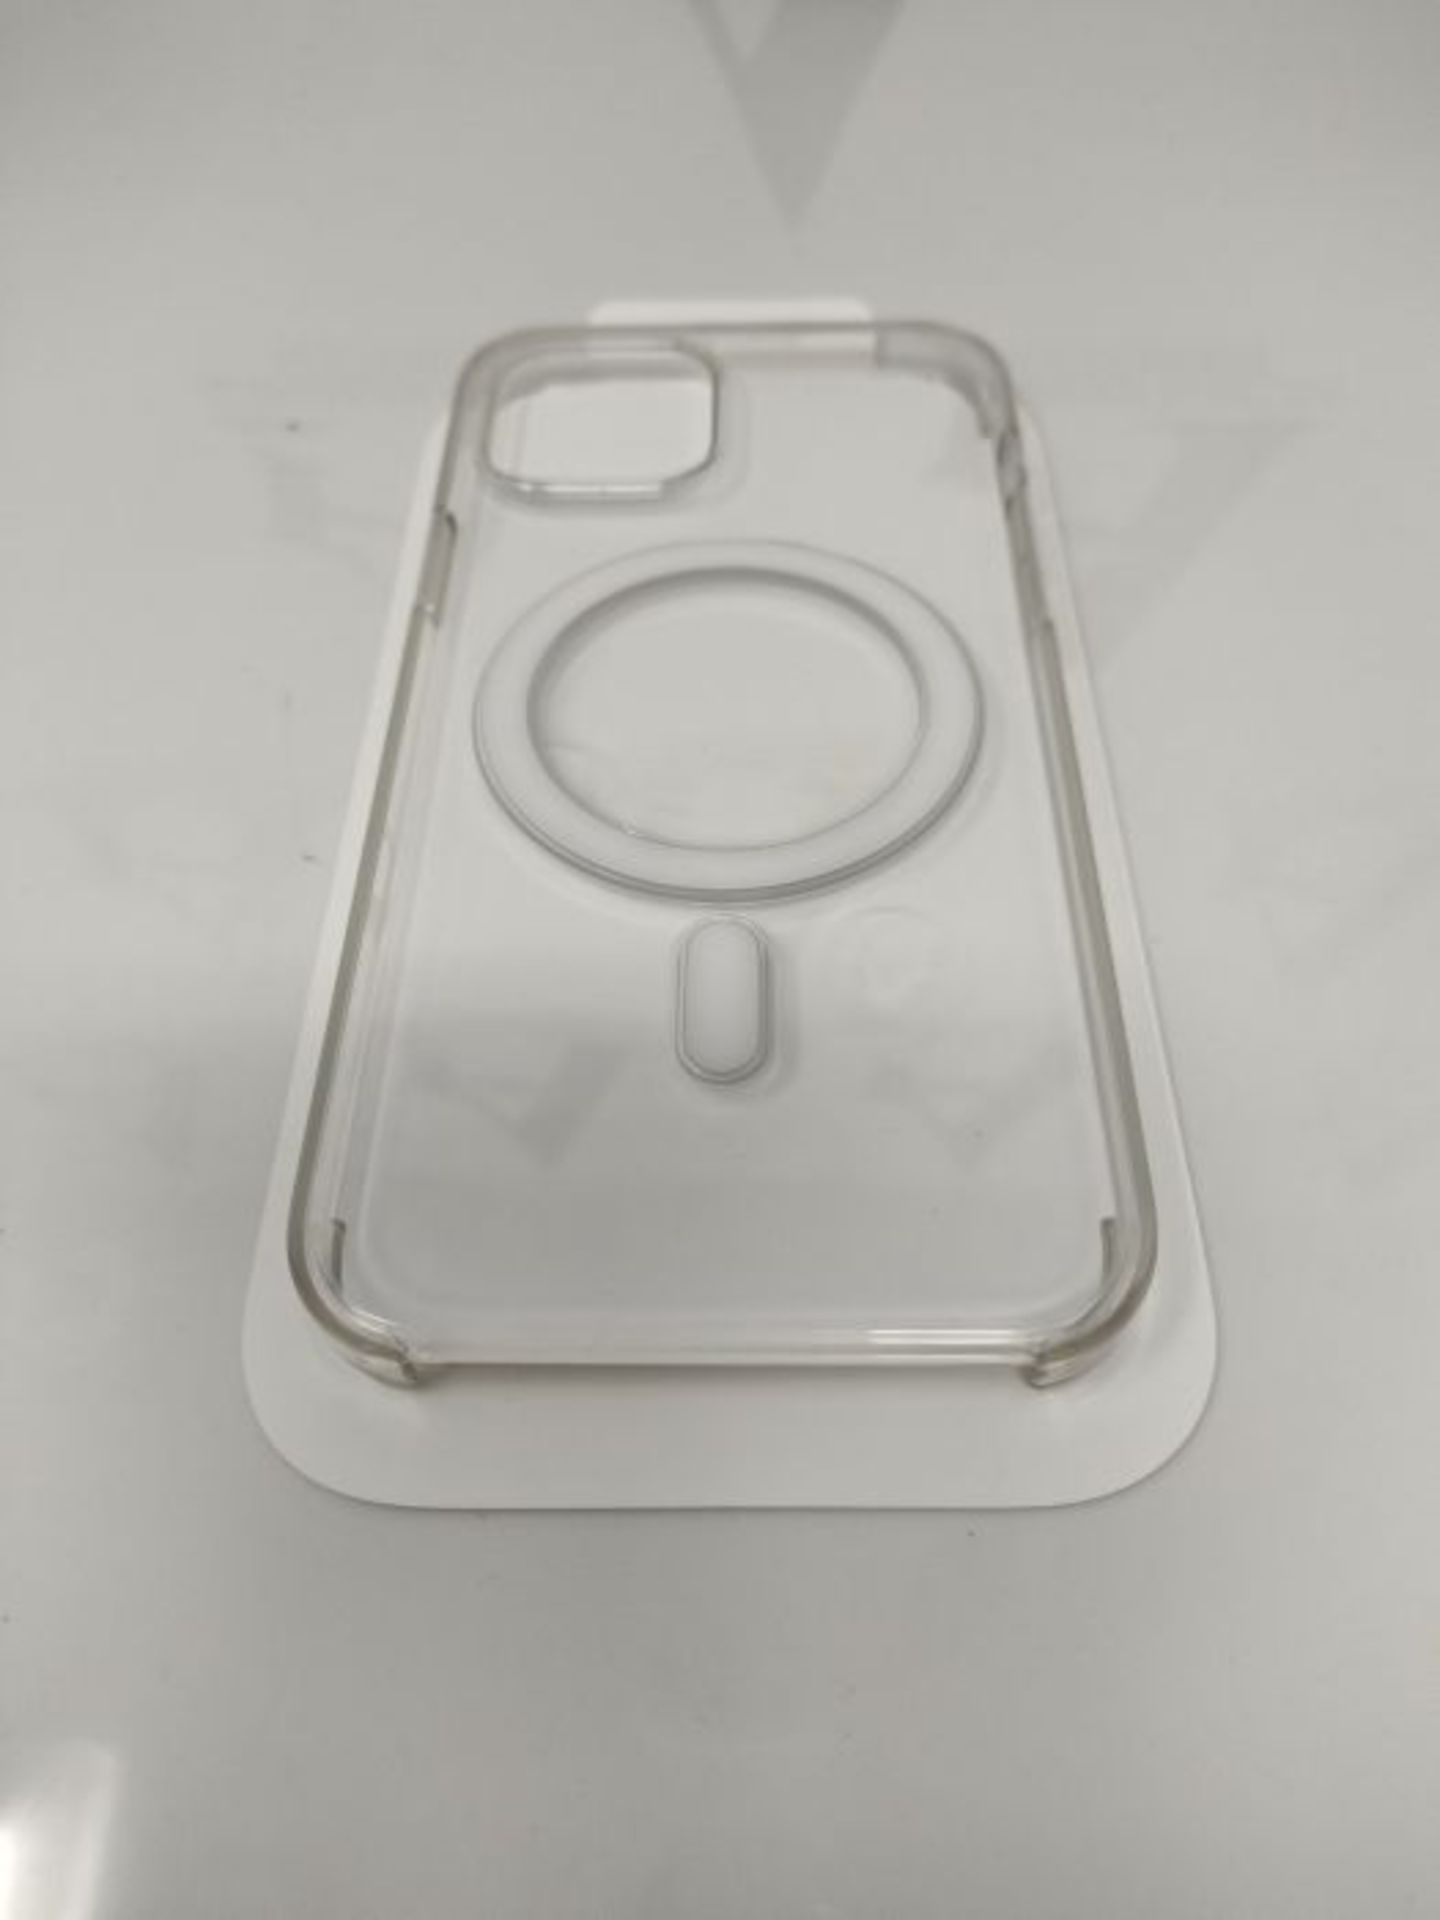 Apple Clear Case (for iPhone 12 | 12 Pro) - 6.1 inches - Image 3 of 3